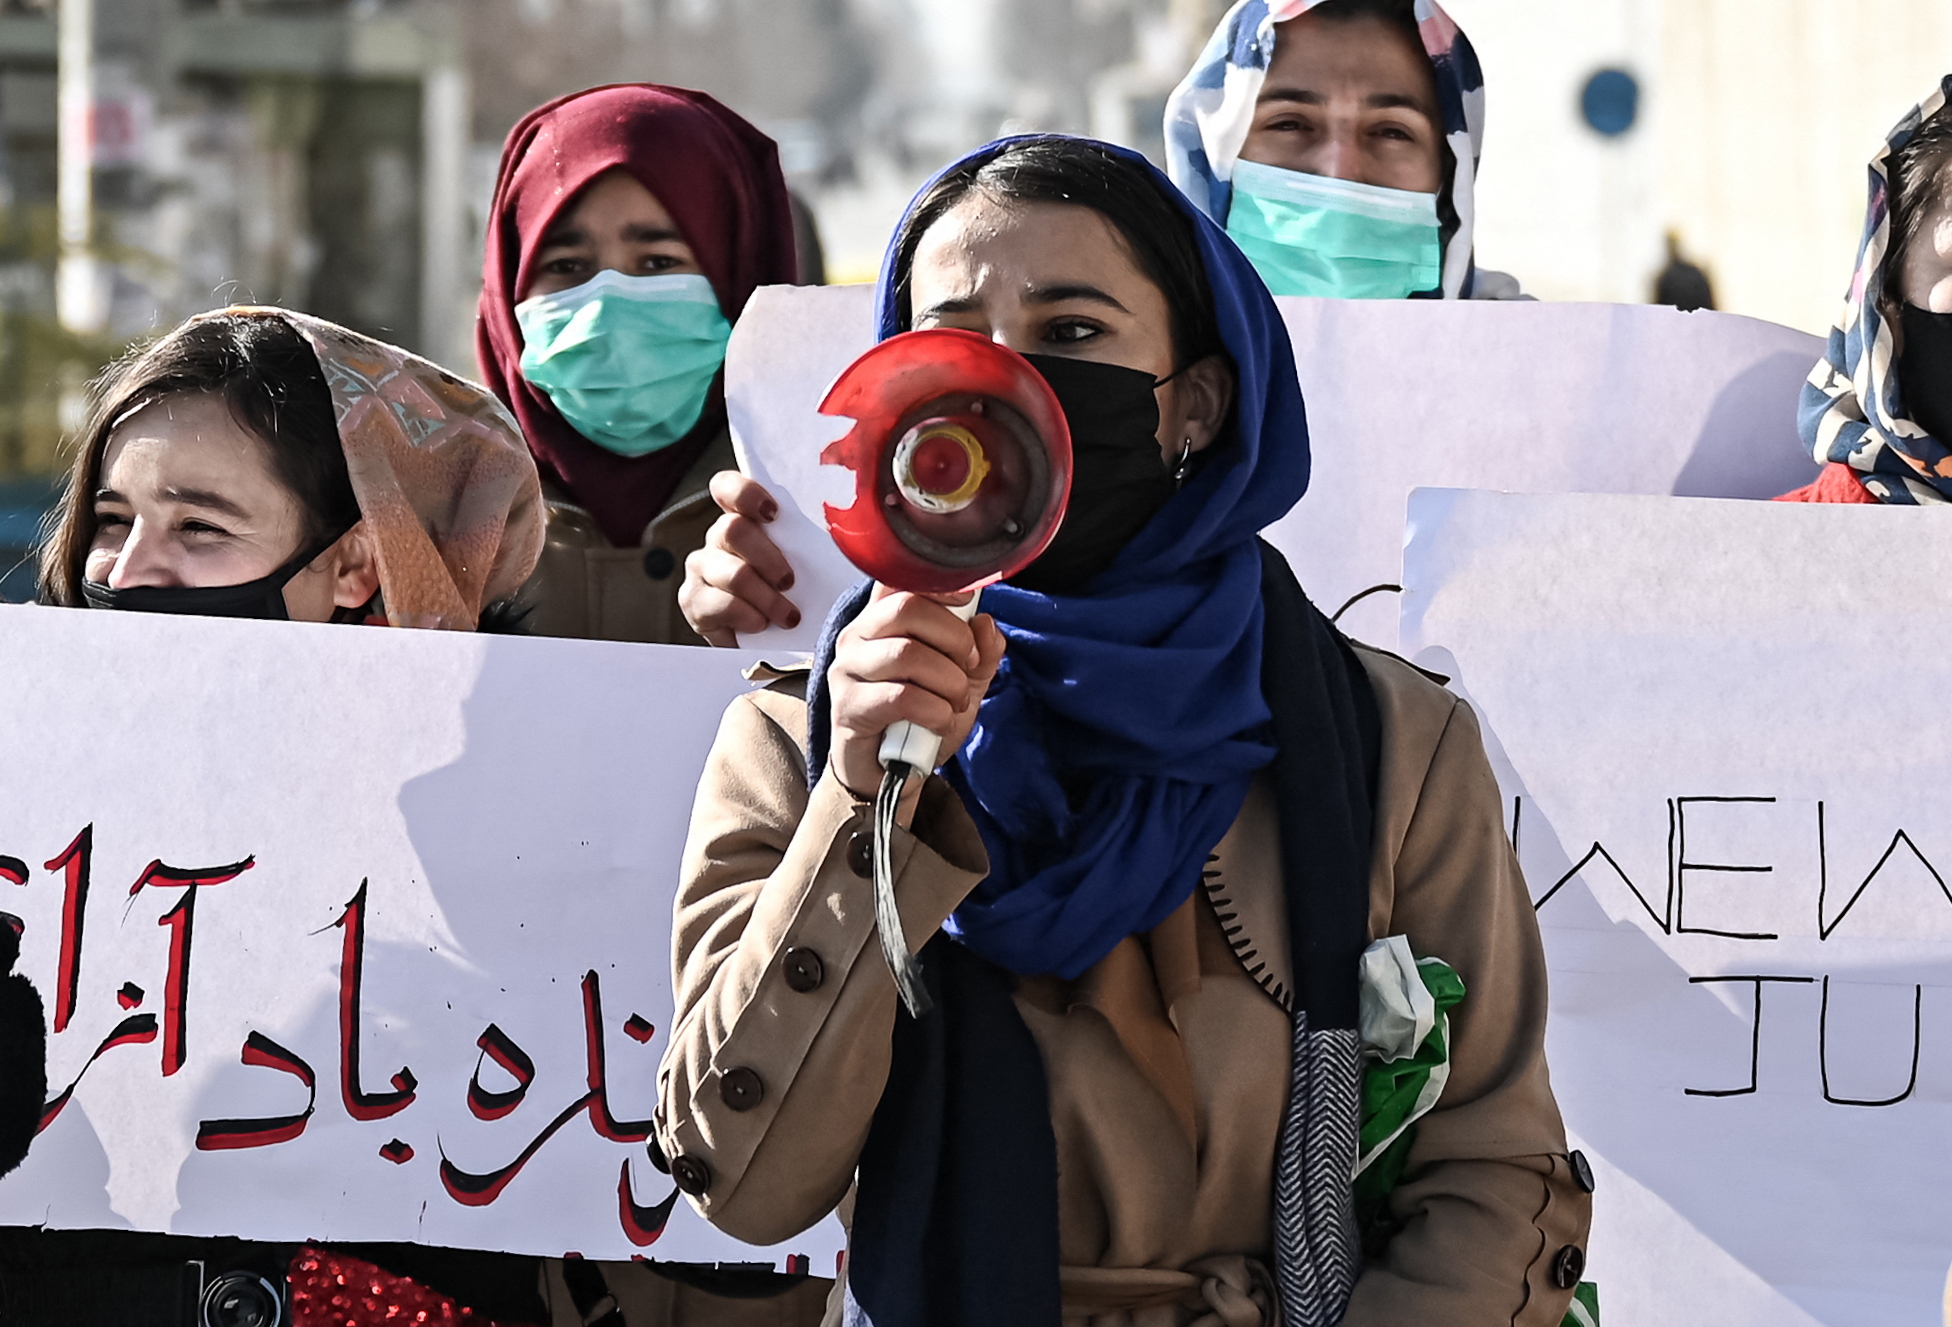 Women hold placards during a protest to demand an end to the extra-judicial killings of former officials of the previous regime, in Kabul on 28 December, 2021 (AFP)